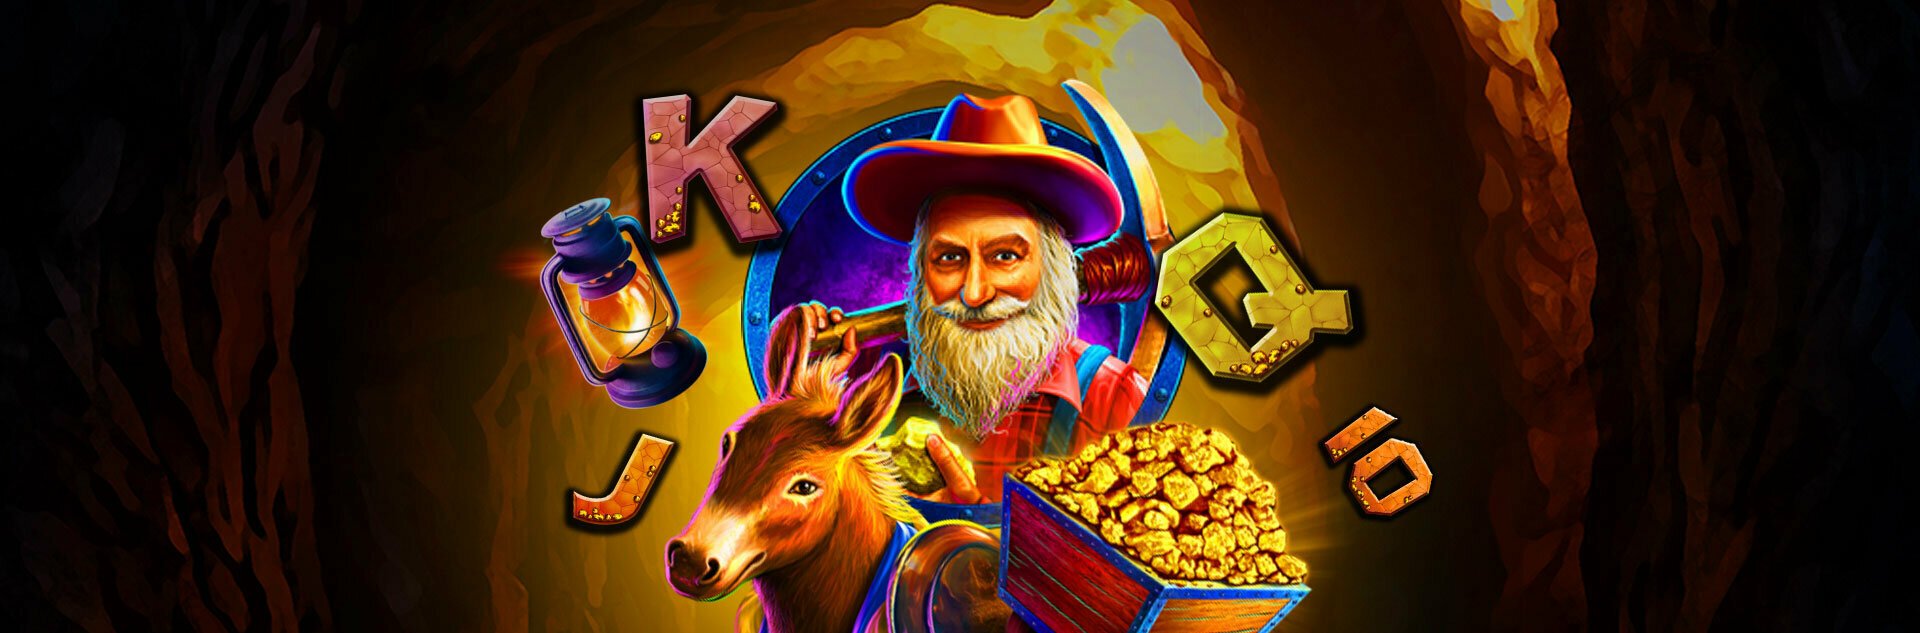 Gold Rush™ Free Spins